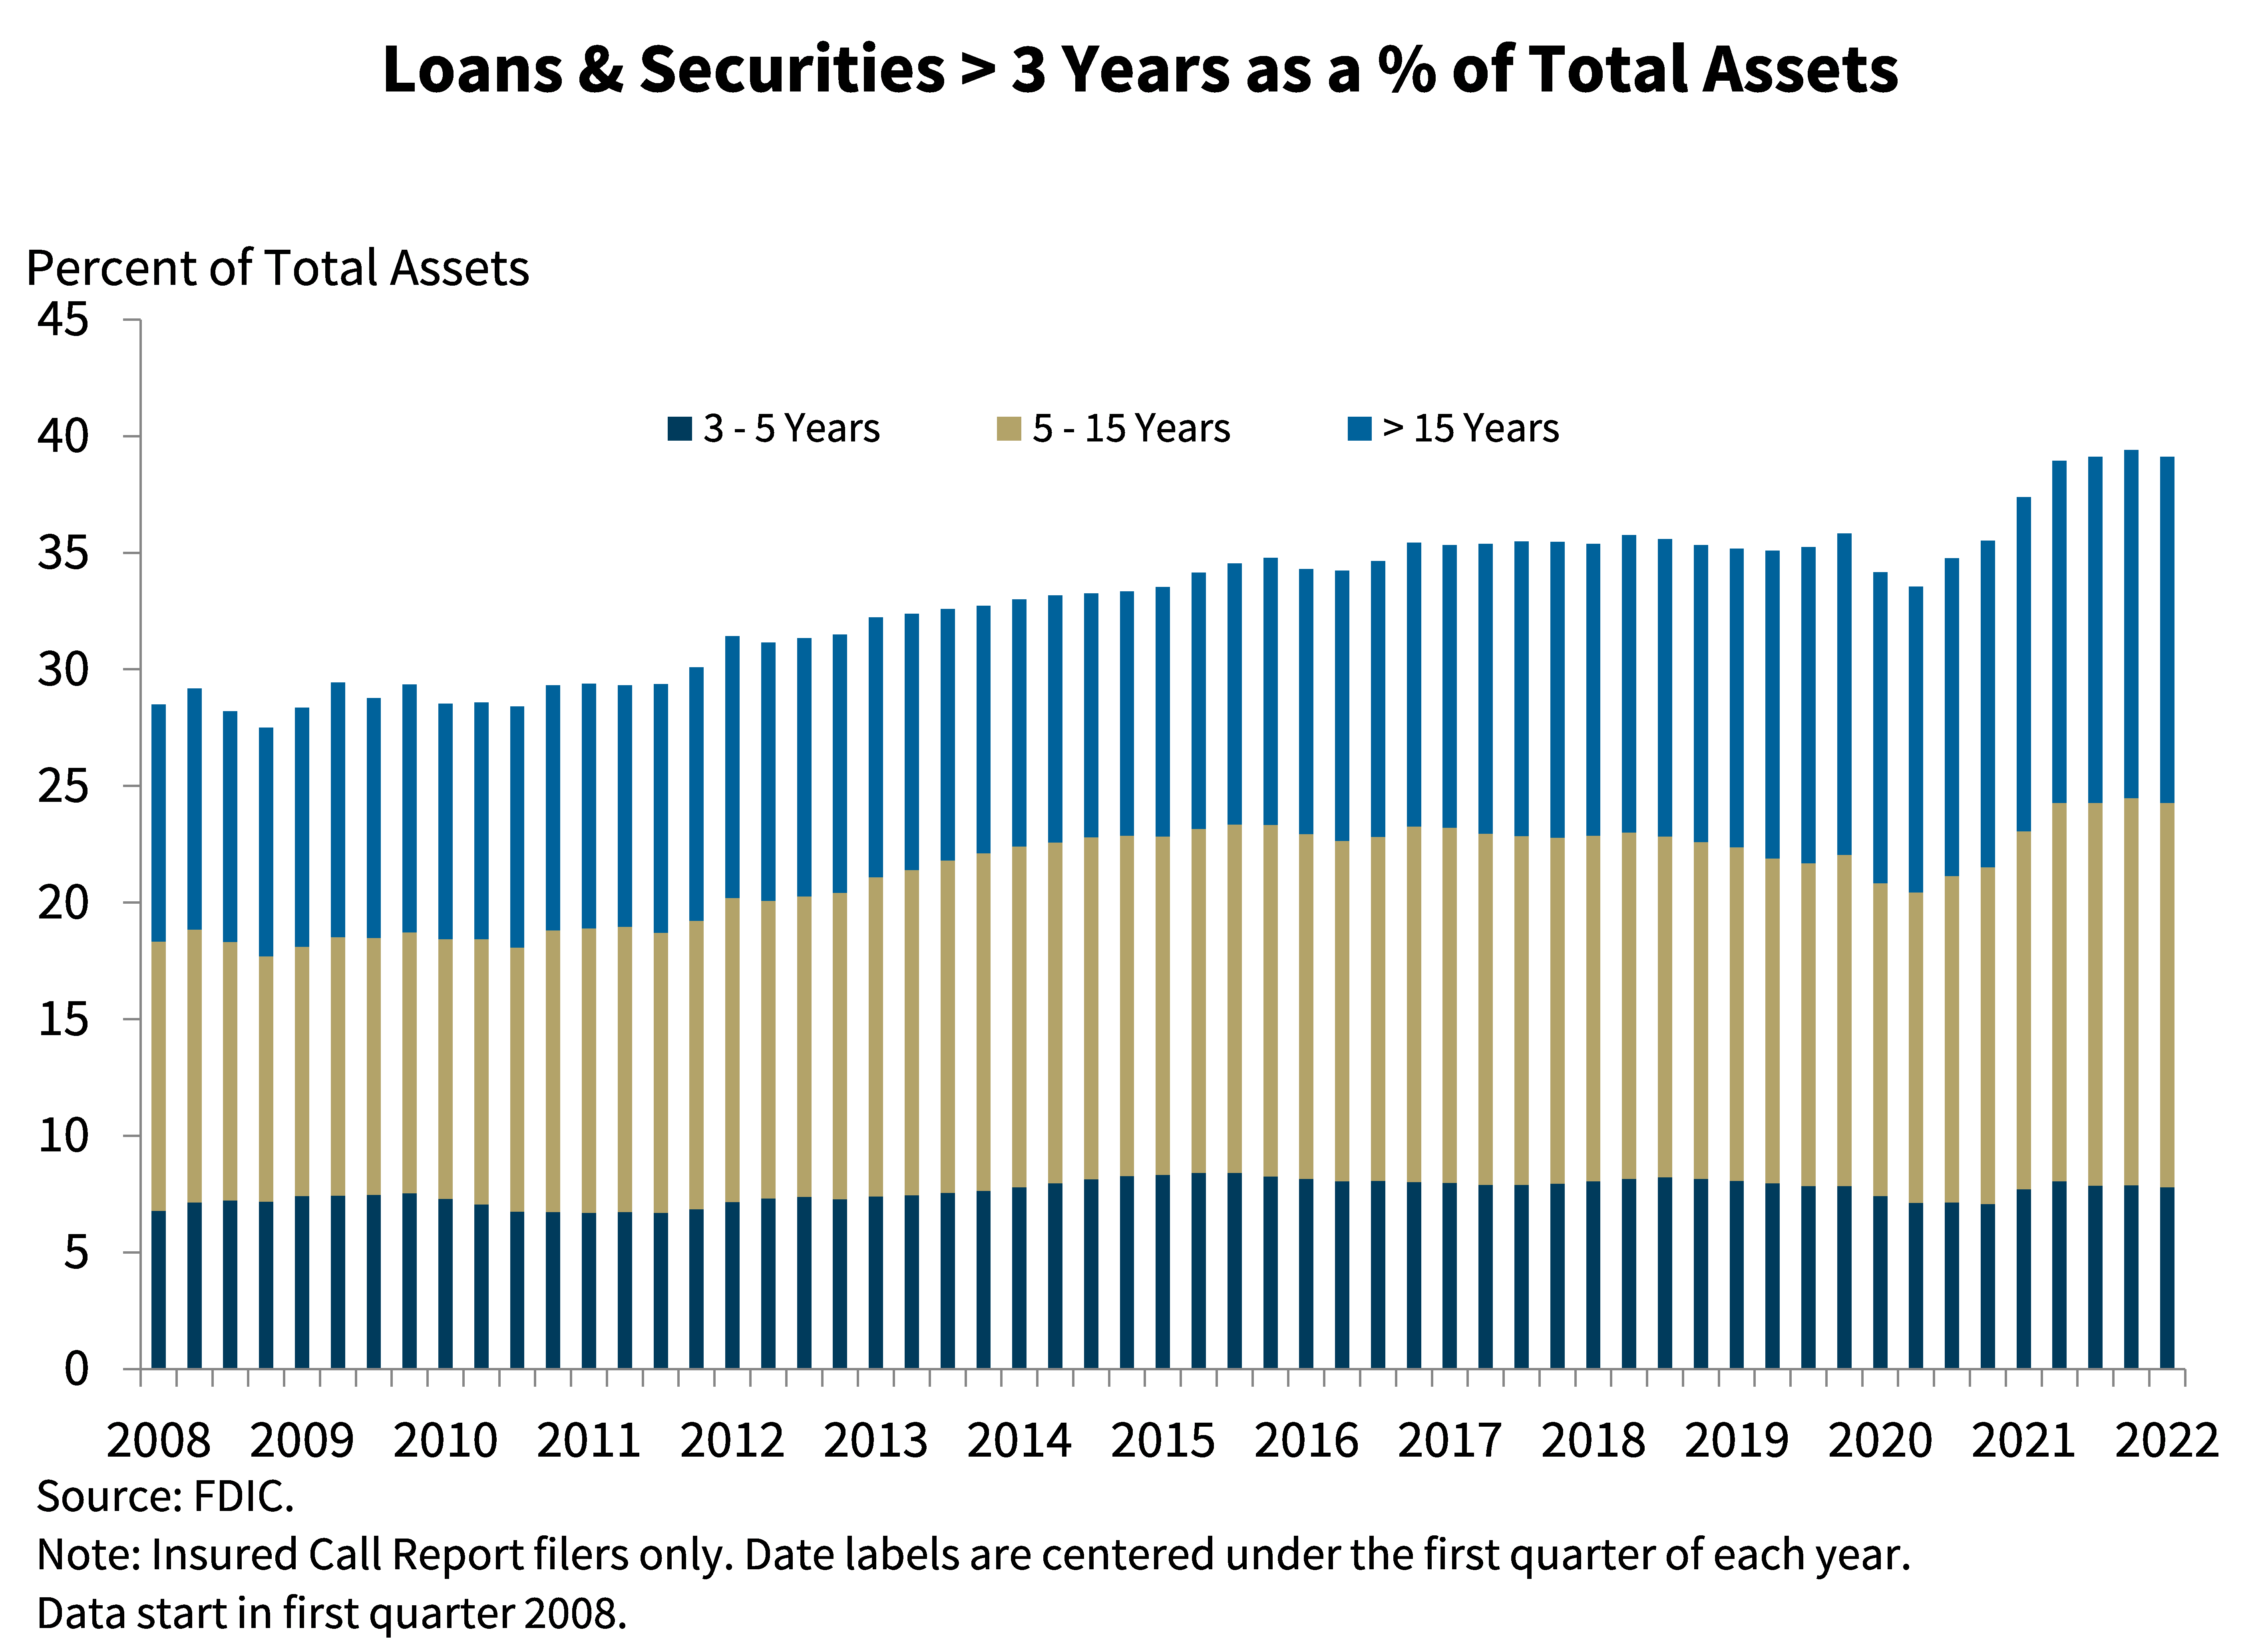 Chart 4: Loans and Securities > 3 Years as a percentage of Total Assets